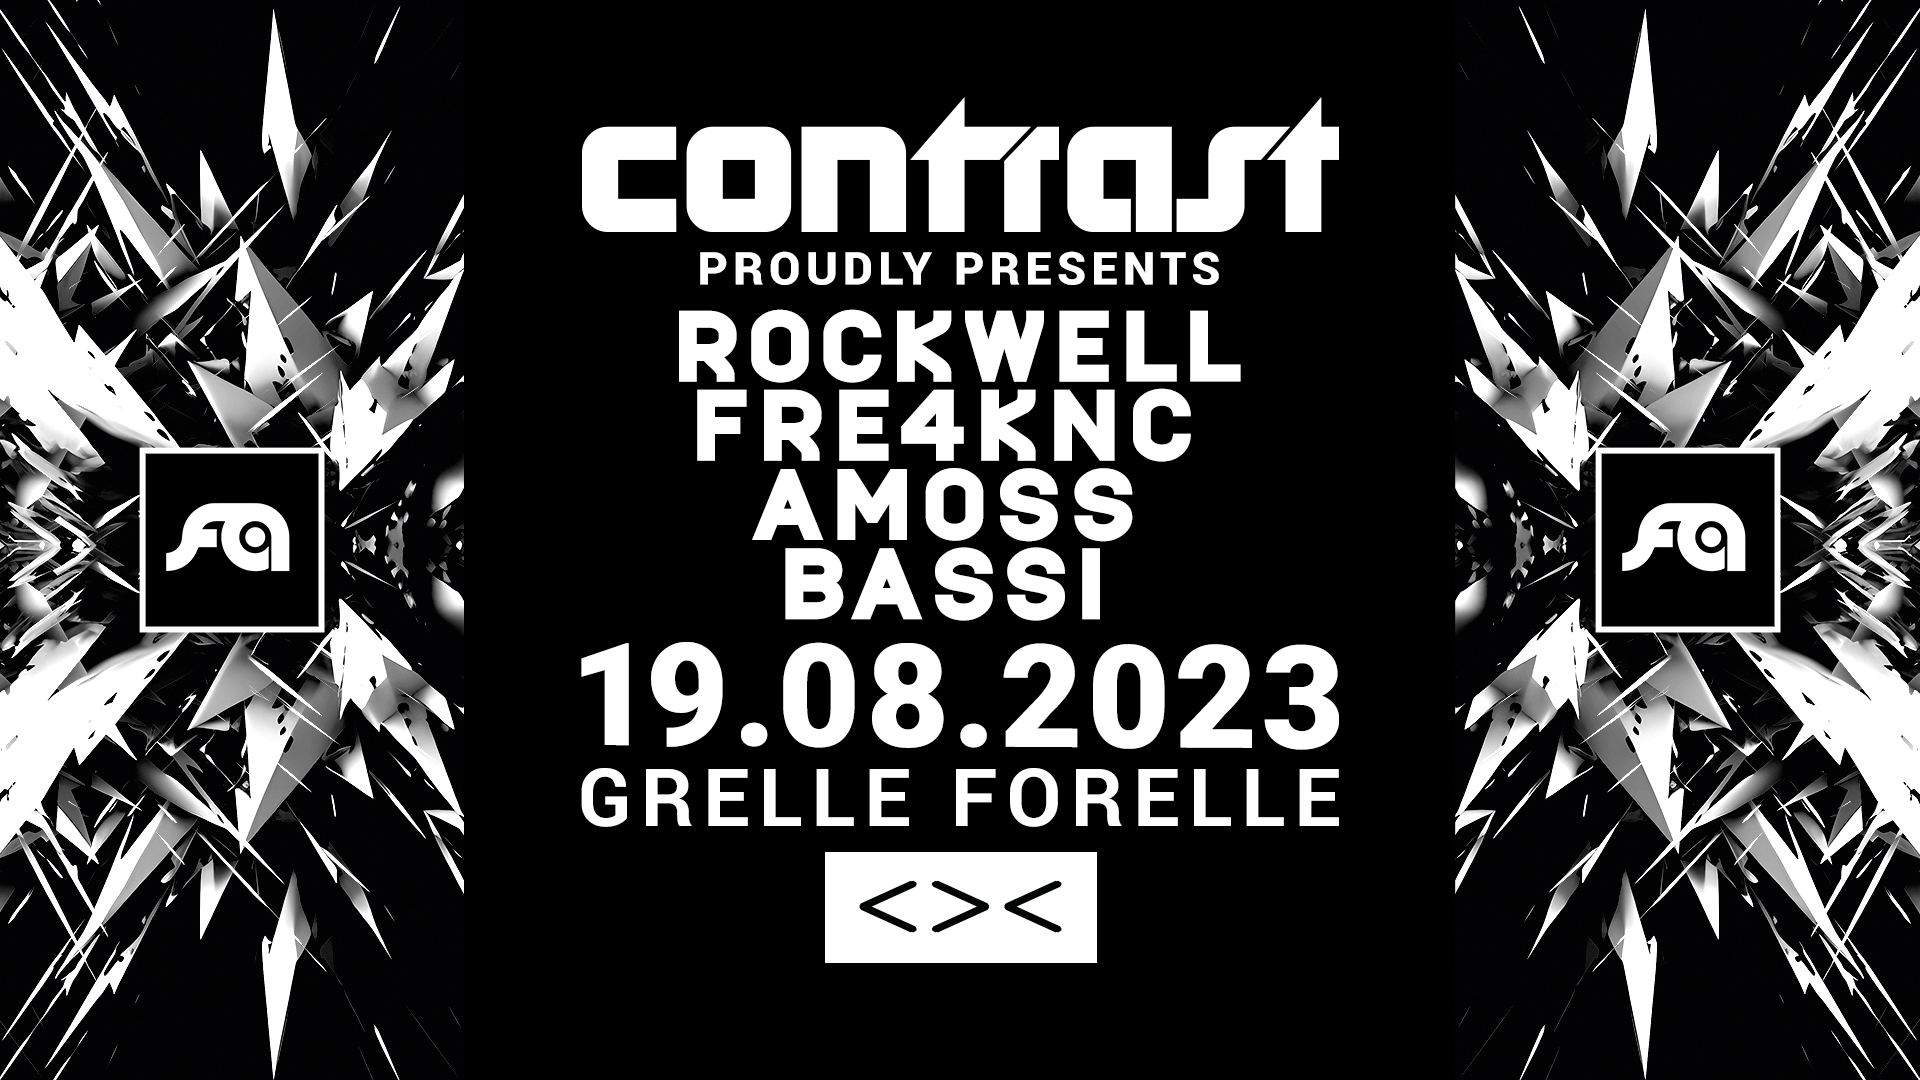 Contrast x Flexout: Rockwell, Fre4knc, Amoss & More - フライヤー表